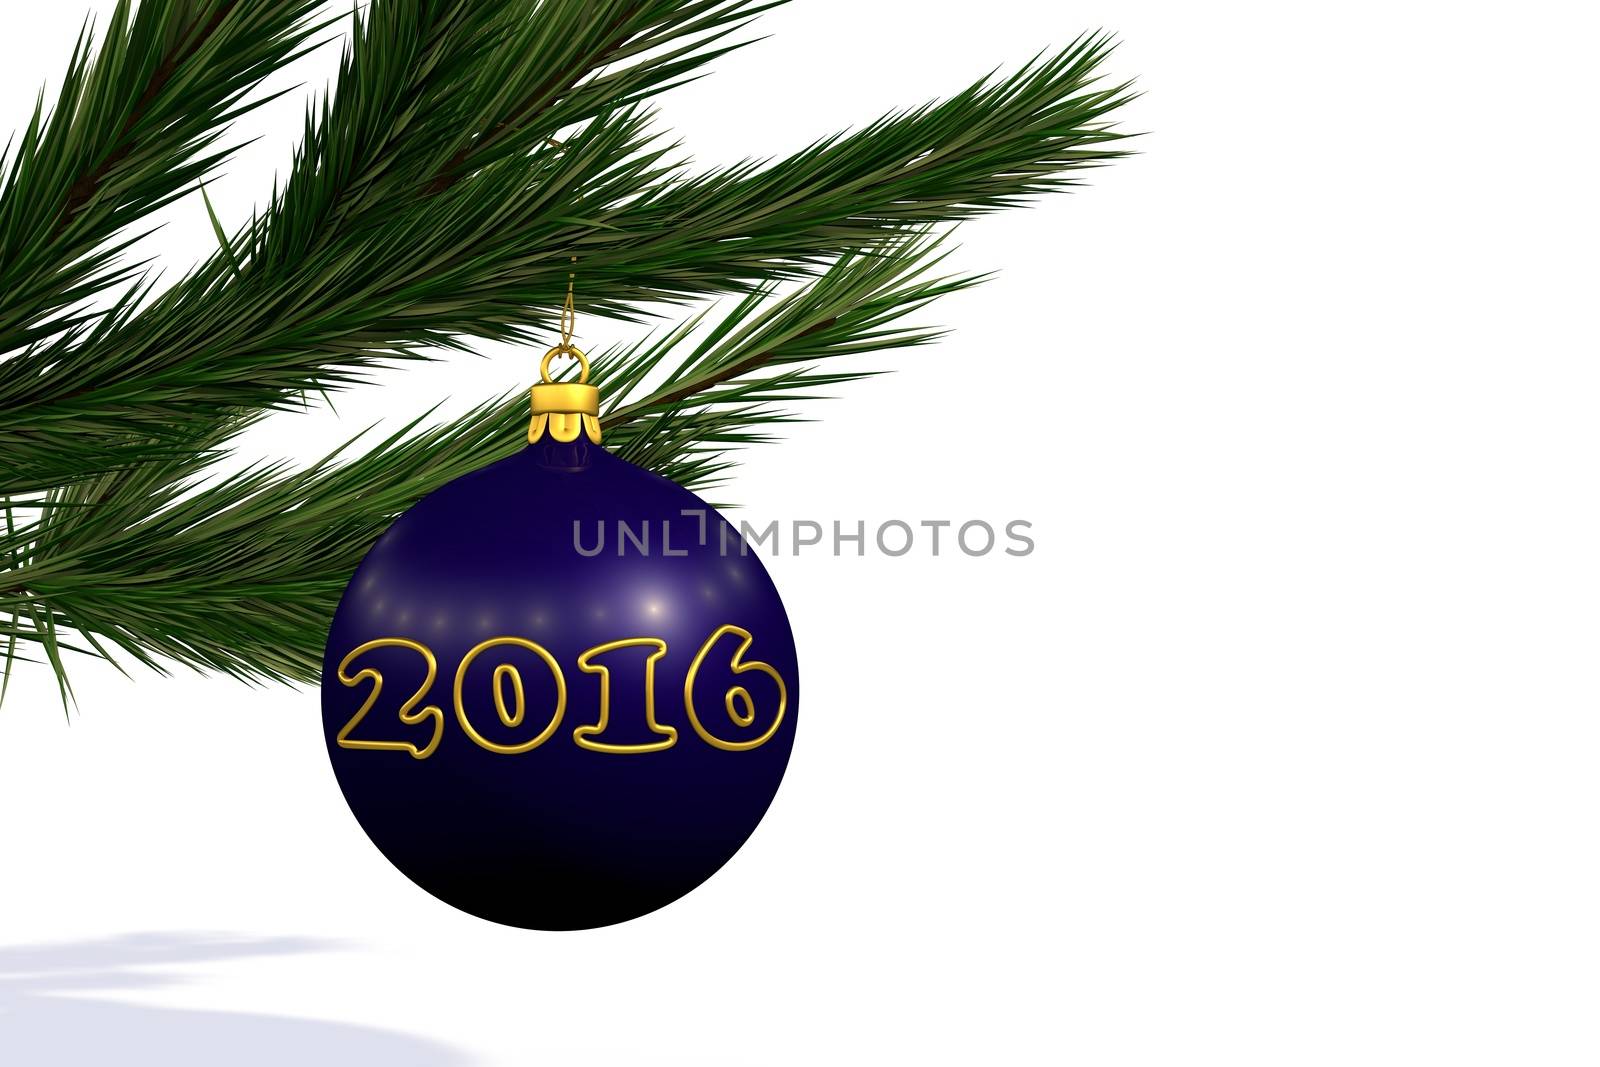 blue Christmas decoration ball on Christmas tree branch isolated on white